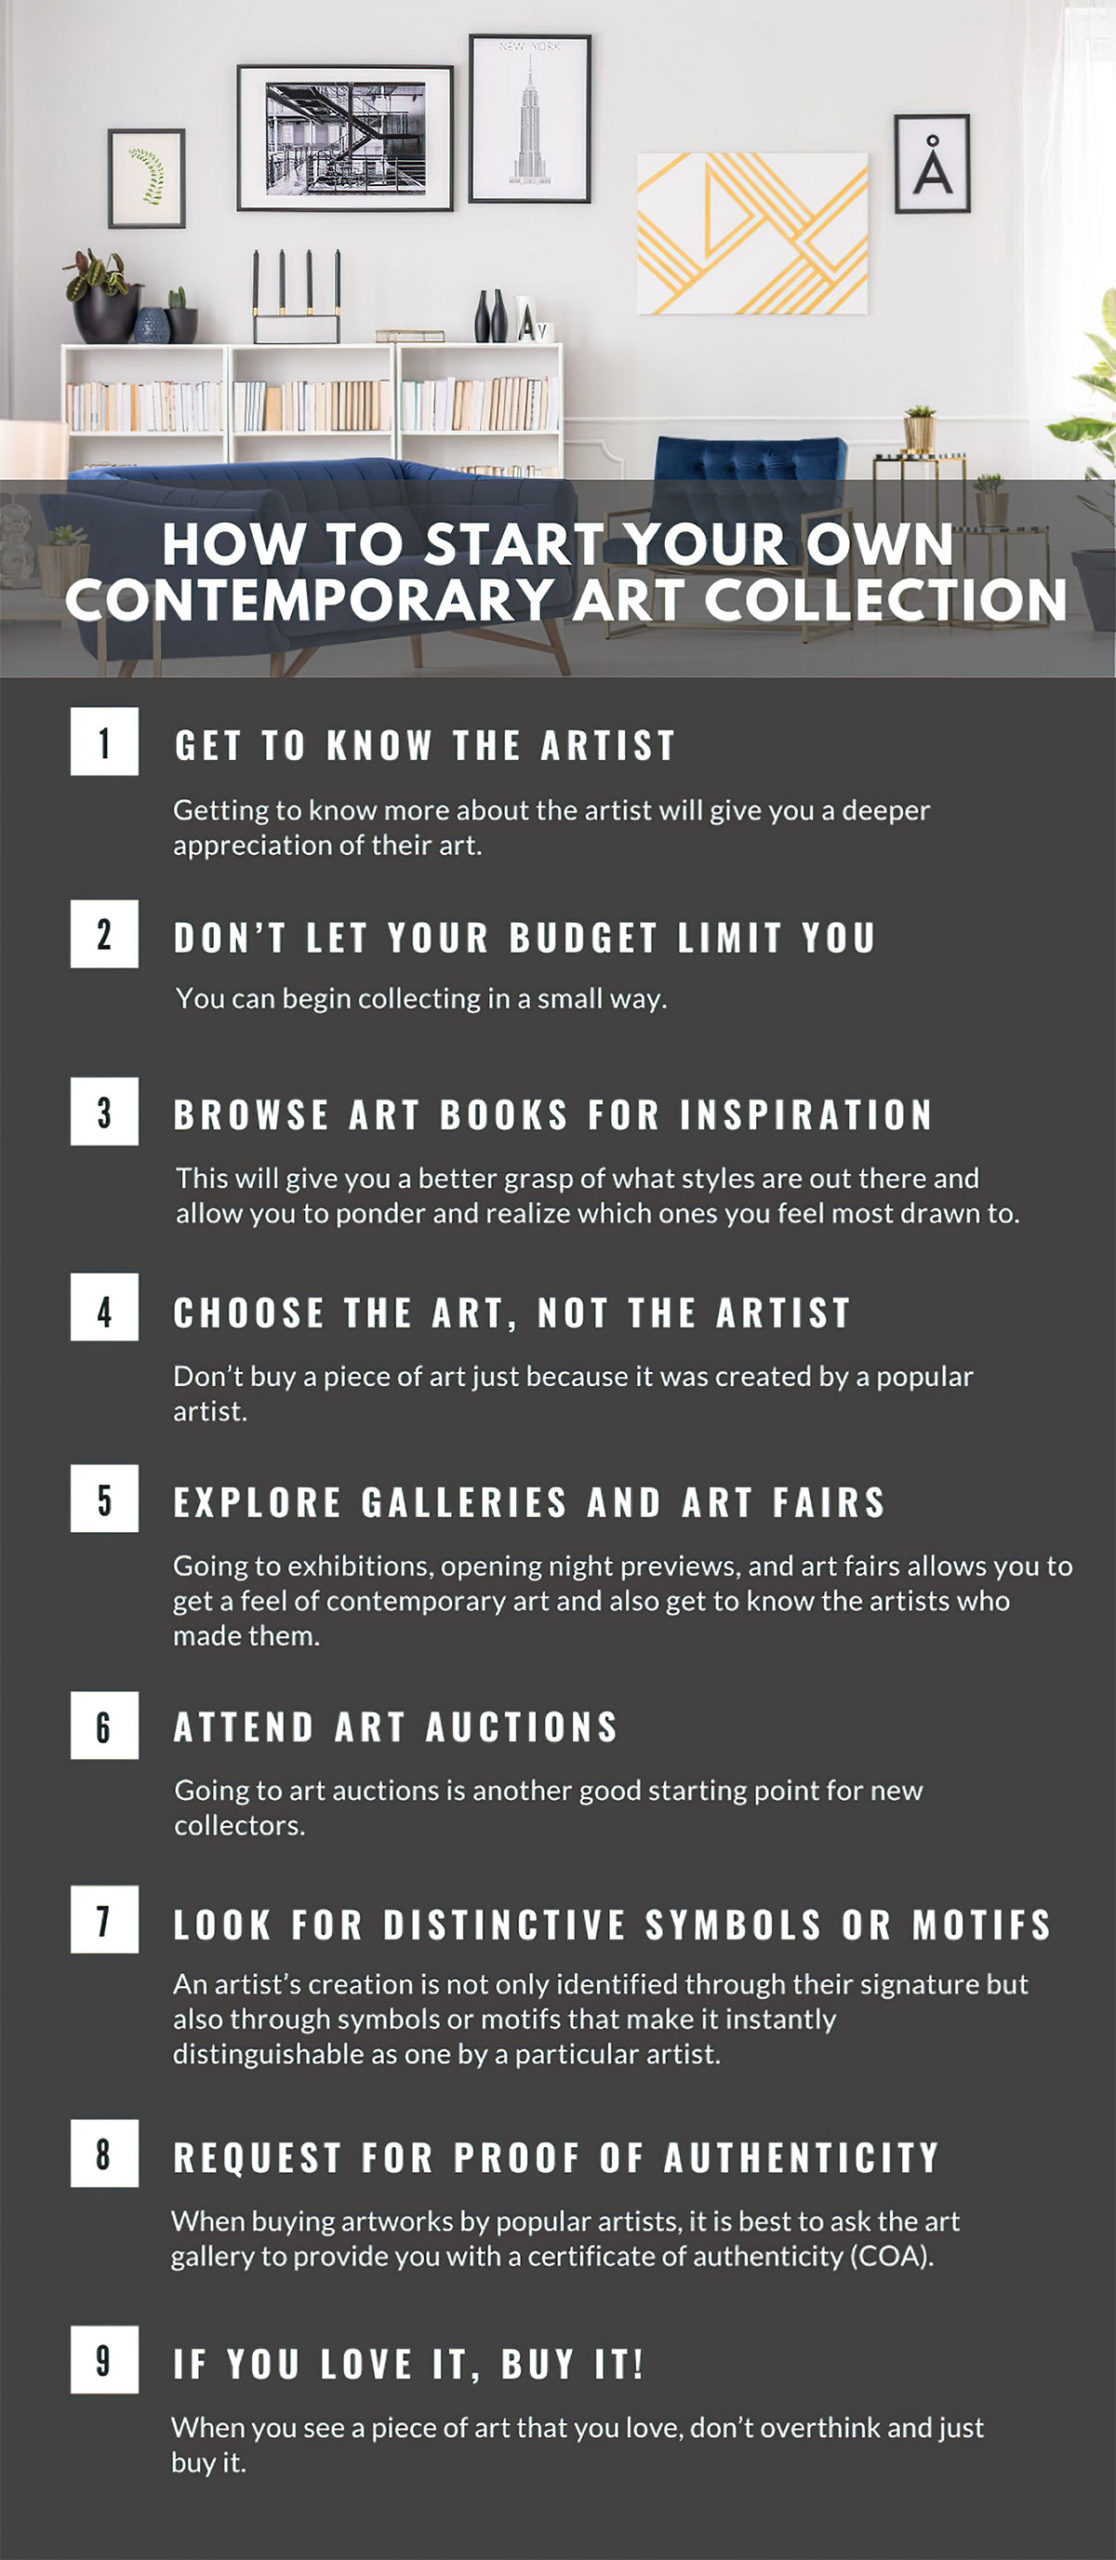 Fine Art Buyers Gude - How to Start Your Own Contemporary Art Collection